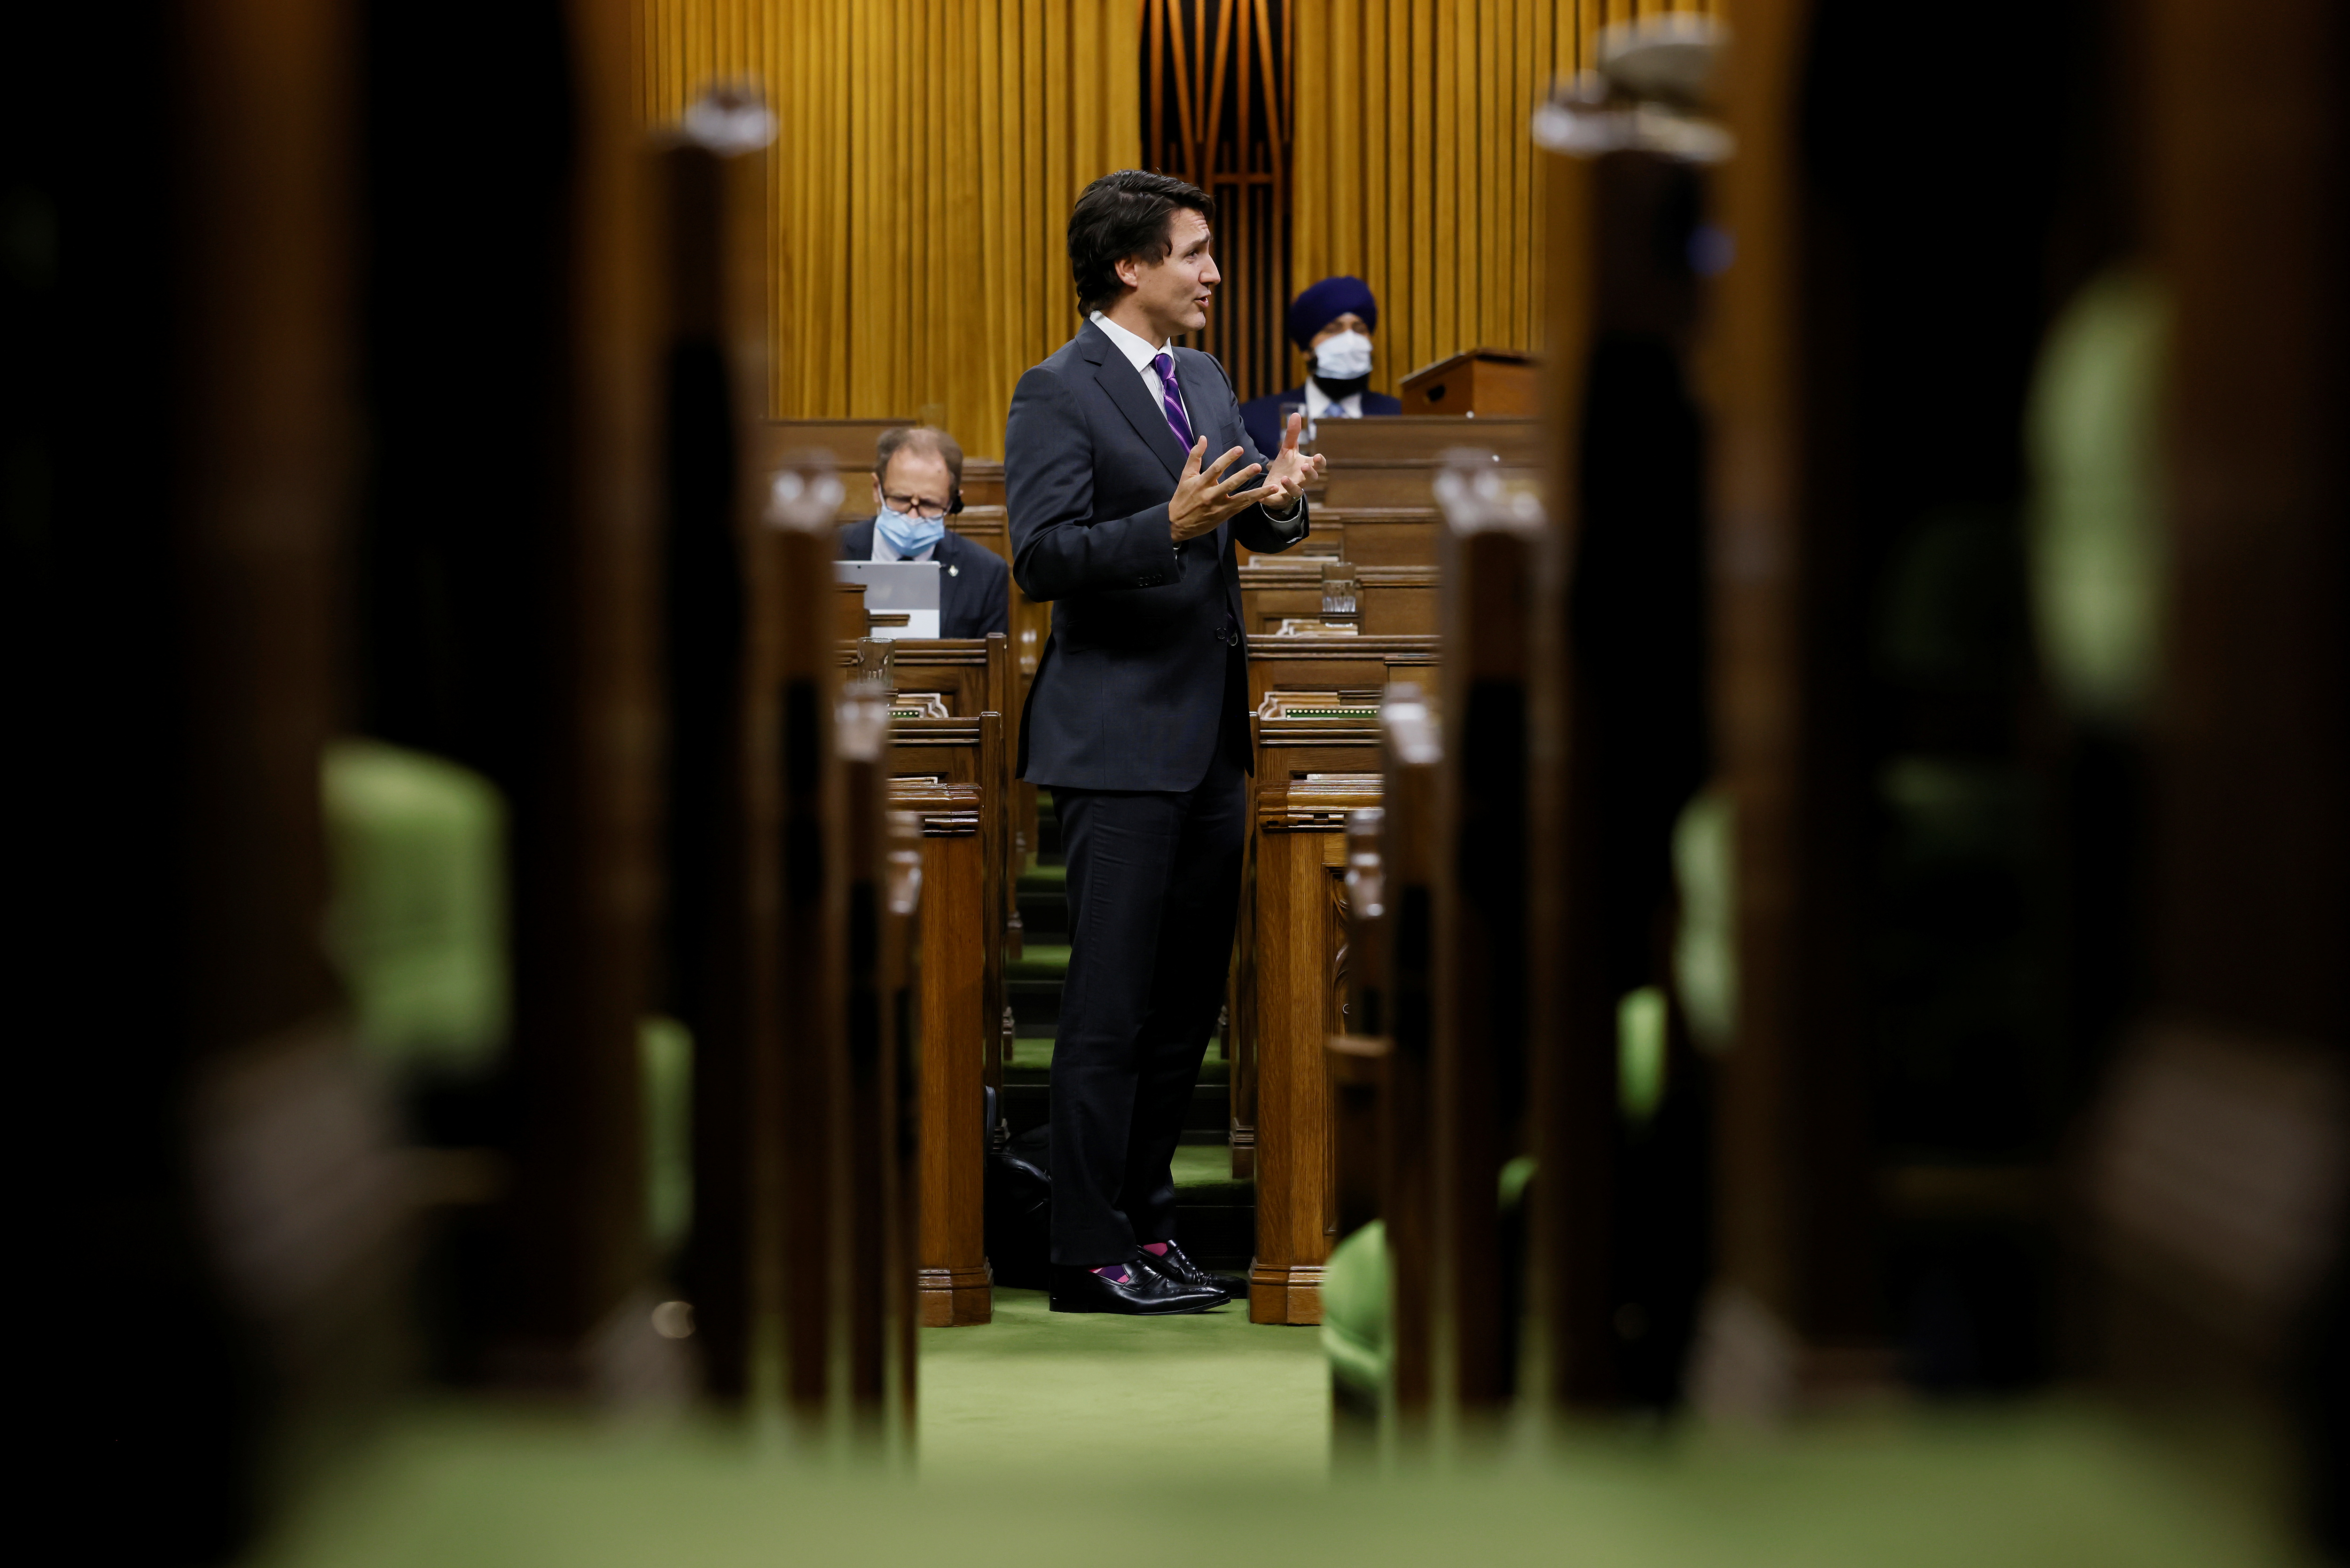 Canada's Prime Minister Justin Trudeau speaks in the House of Commons on Parliament Hill in Ottawa, Ontario, Canada November 30, 2021. REUTERS/Blair Gable